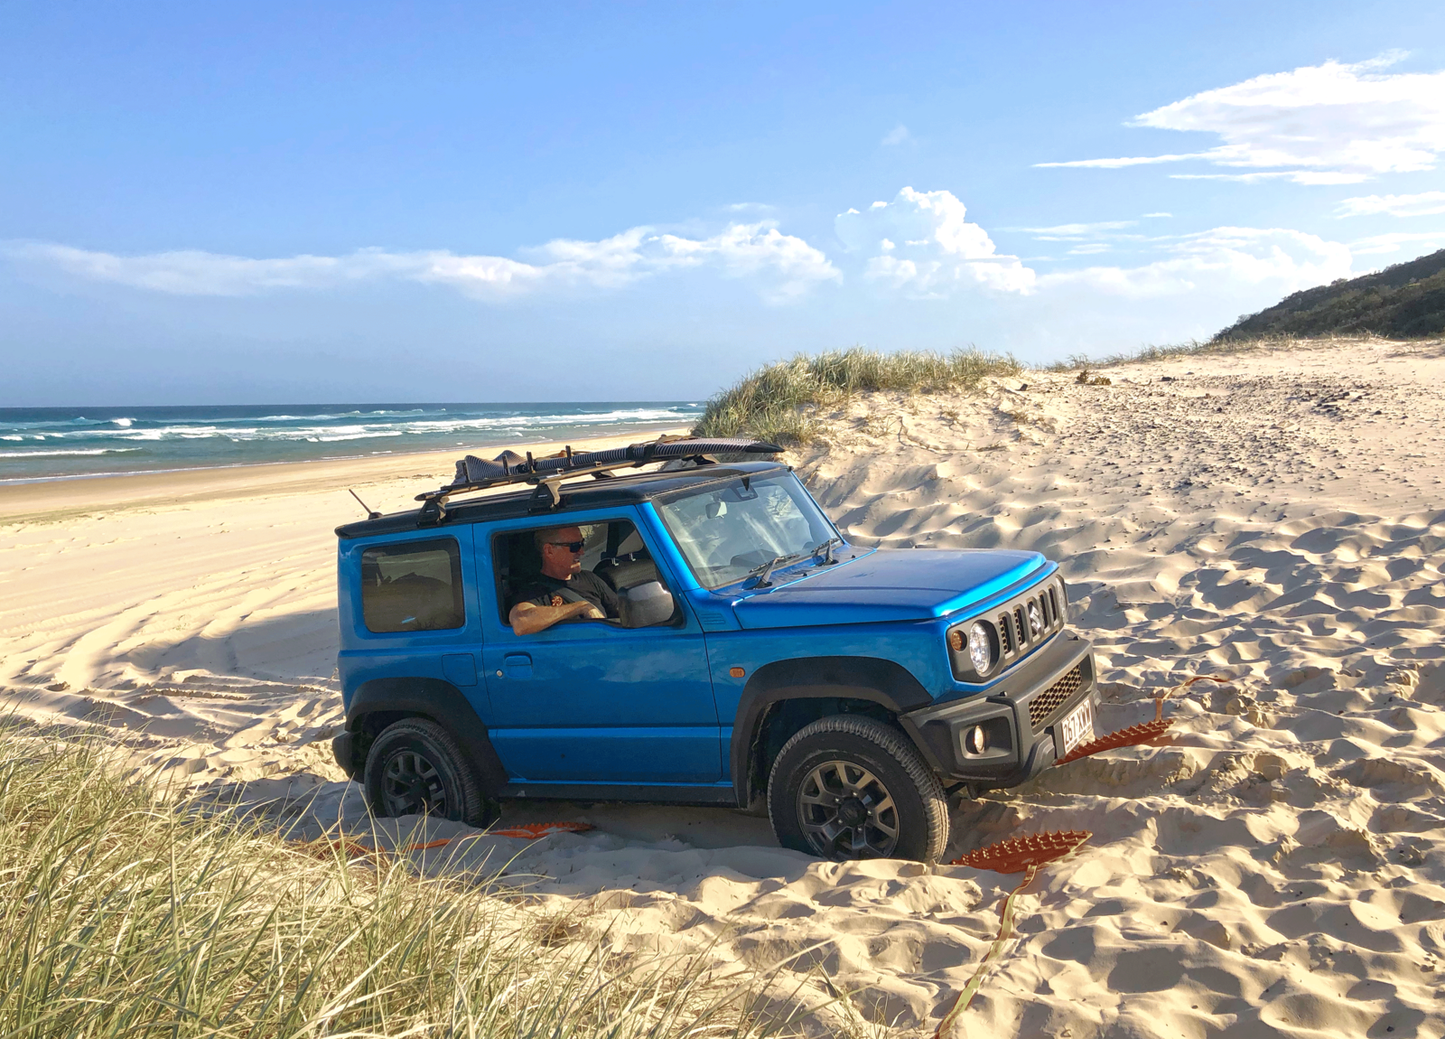 maxtrax mini jaxbase black showing the base. overlanders traction aid in a compact package. suzuki jimny in the sand